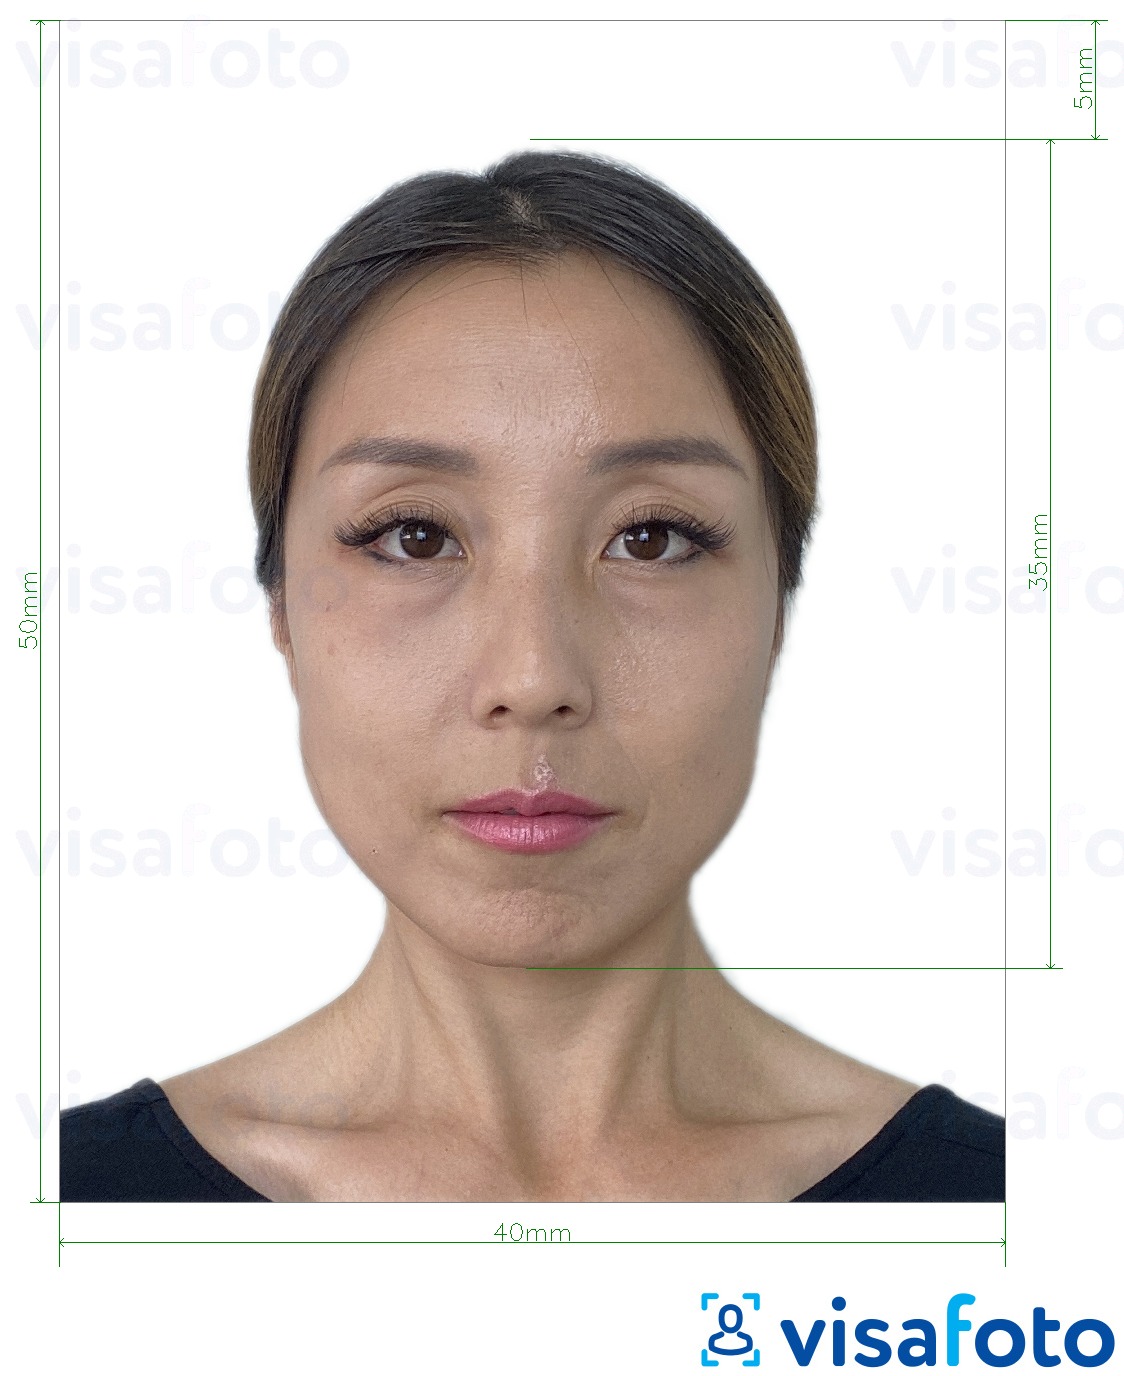 Example of photo for Hong Kong ID card 4x5 cm with exact size specification